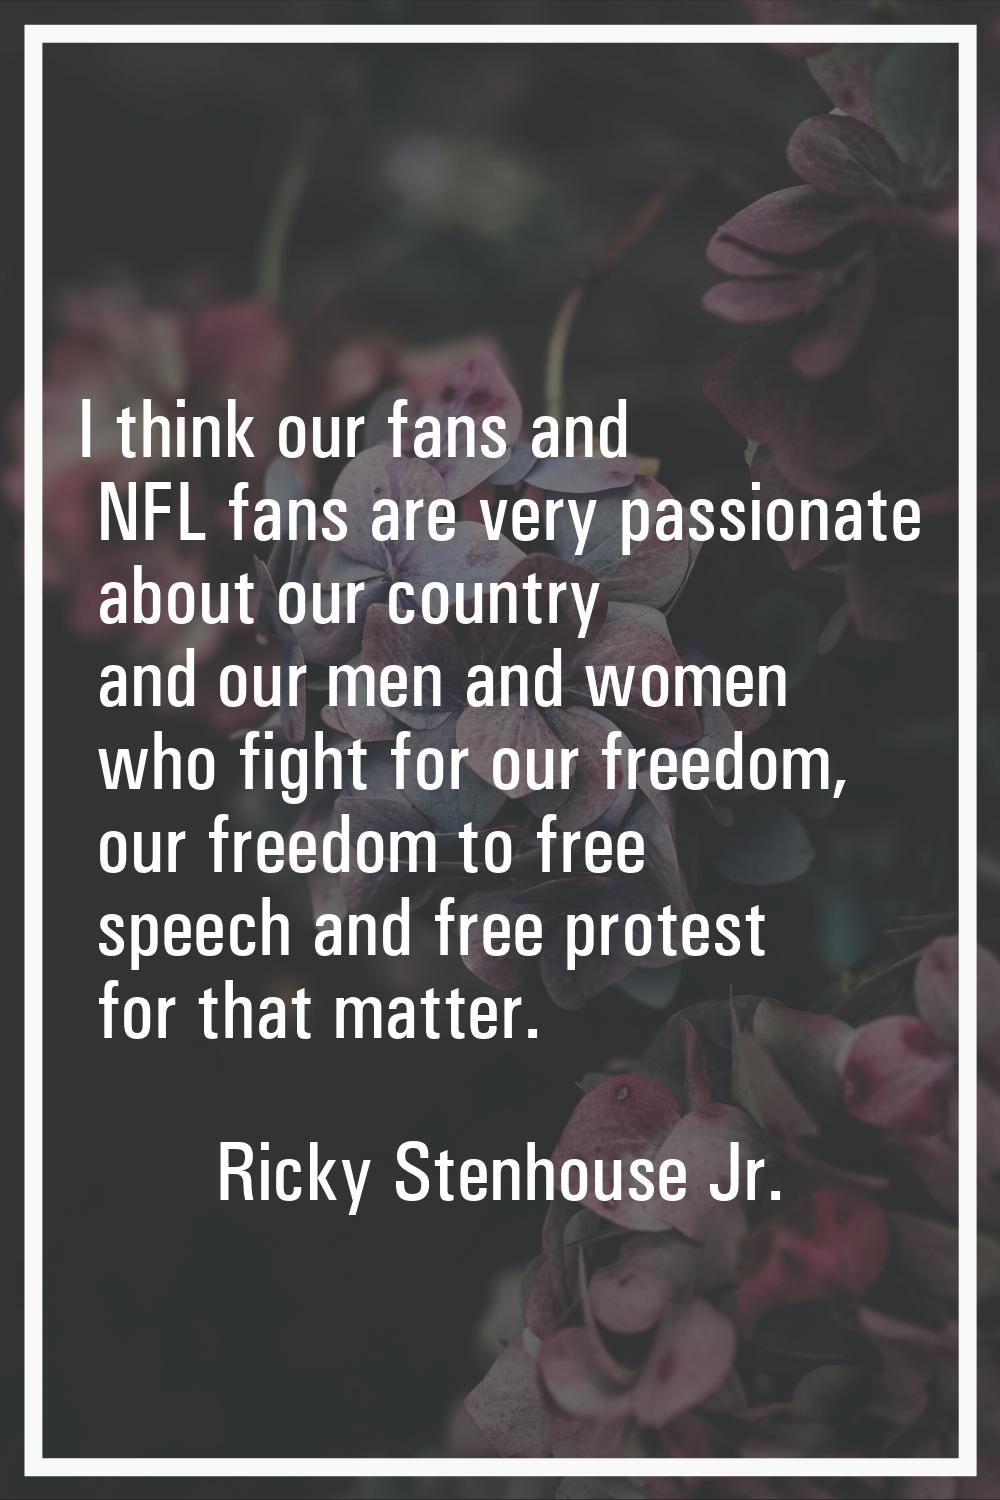 I think our fans and NFL fans are very passionate about our country and our men and women who fight